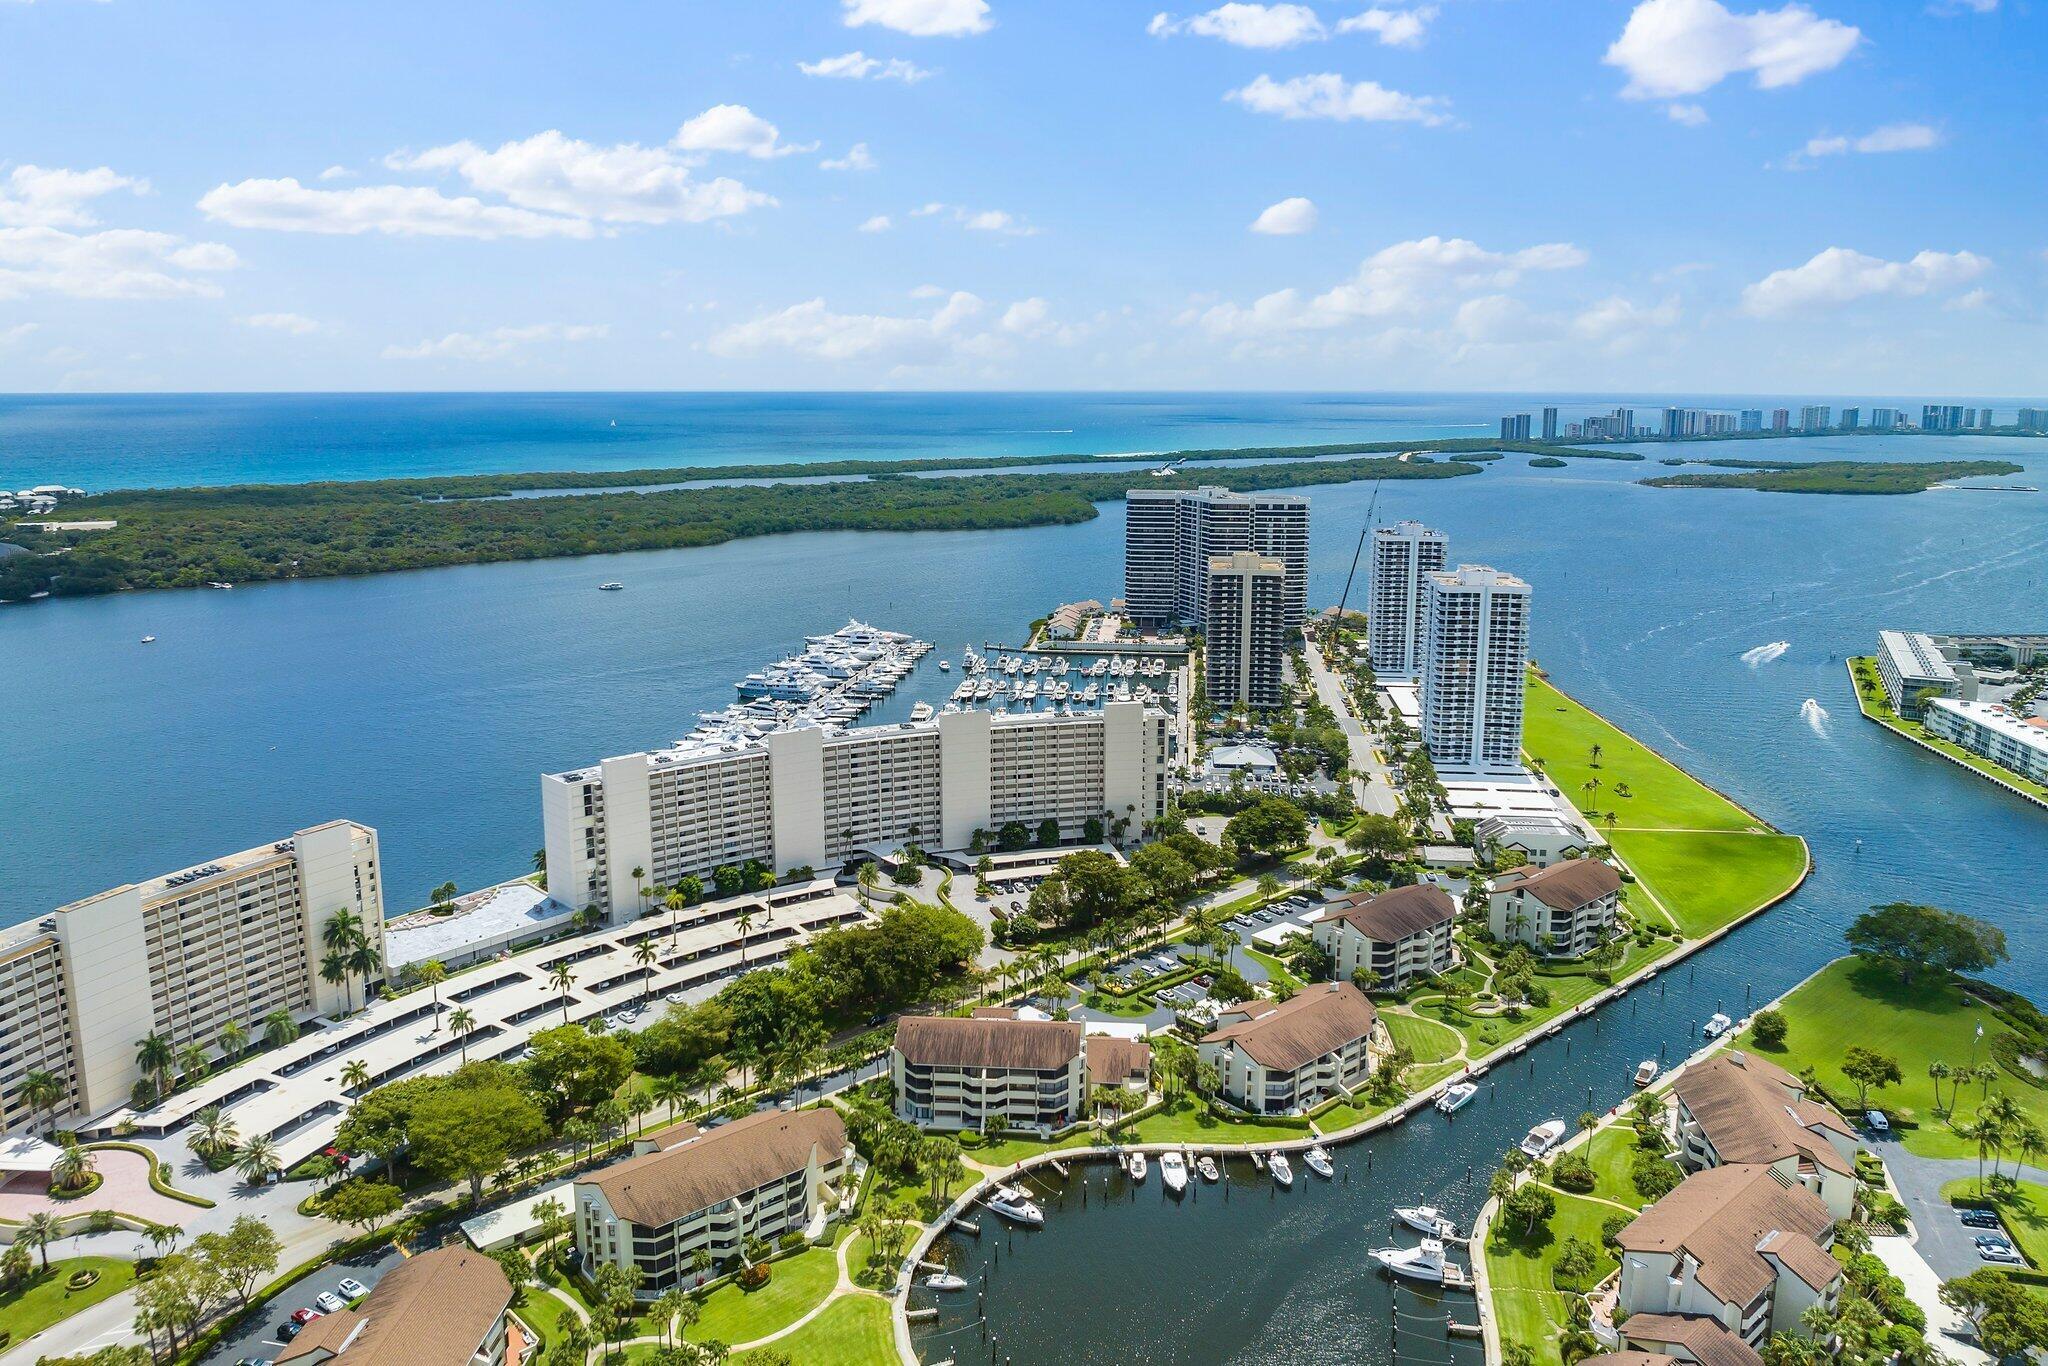 #ComeJoinUs at OLD PORT COVE a 60 acre resort style community! Experience breathtaking sunrises glistening on the water and yachts in the Marina from the balcony of your 3 bedroom, 2.5 bath meticulous 3rd floor condo offering over 1840 SF.  Grand entrance to the very spacious living room with Impact sliders to the balcony and open to the kitchen and formal dining room. Plenty of granite counter tops and cabinets fill this kitchen and is completed w/ stainless steel appliances, washer/dryer and is open to the 3rd br/den!  The Primary br has plantation shutters overlooking Marina, a luxurious new bathroom with updated plumbing and electric, quartz counter tops, huge closet spaces.  Pets are welcome, new A/C w/smart thermostat, home warranty and steps from elevator and parking plus-